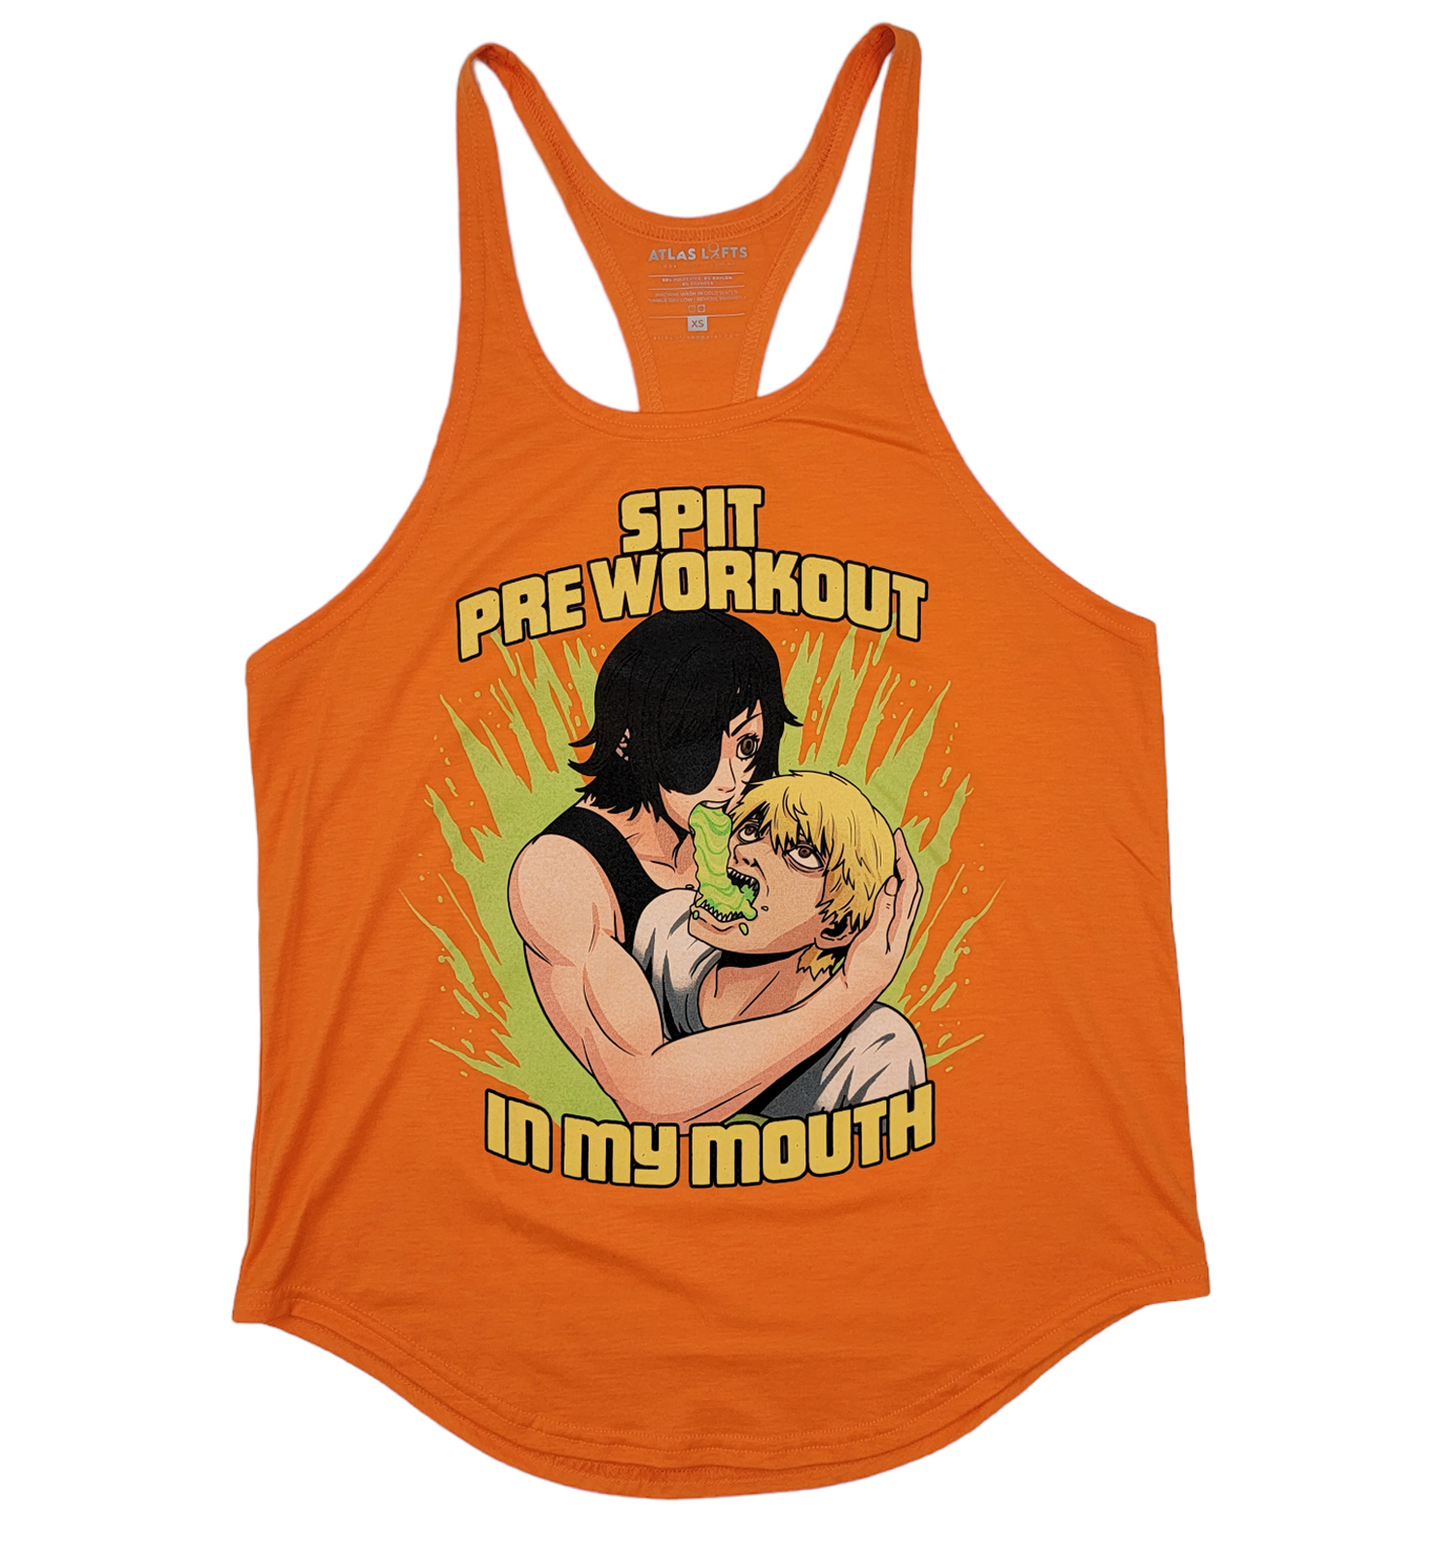 Spit Pre Workout in My Mouth: Racerback Stringer